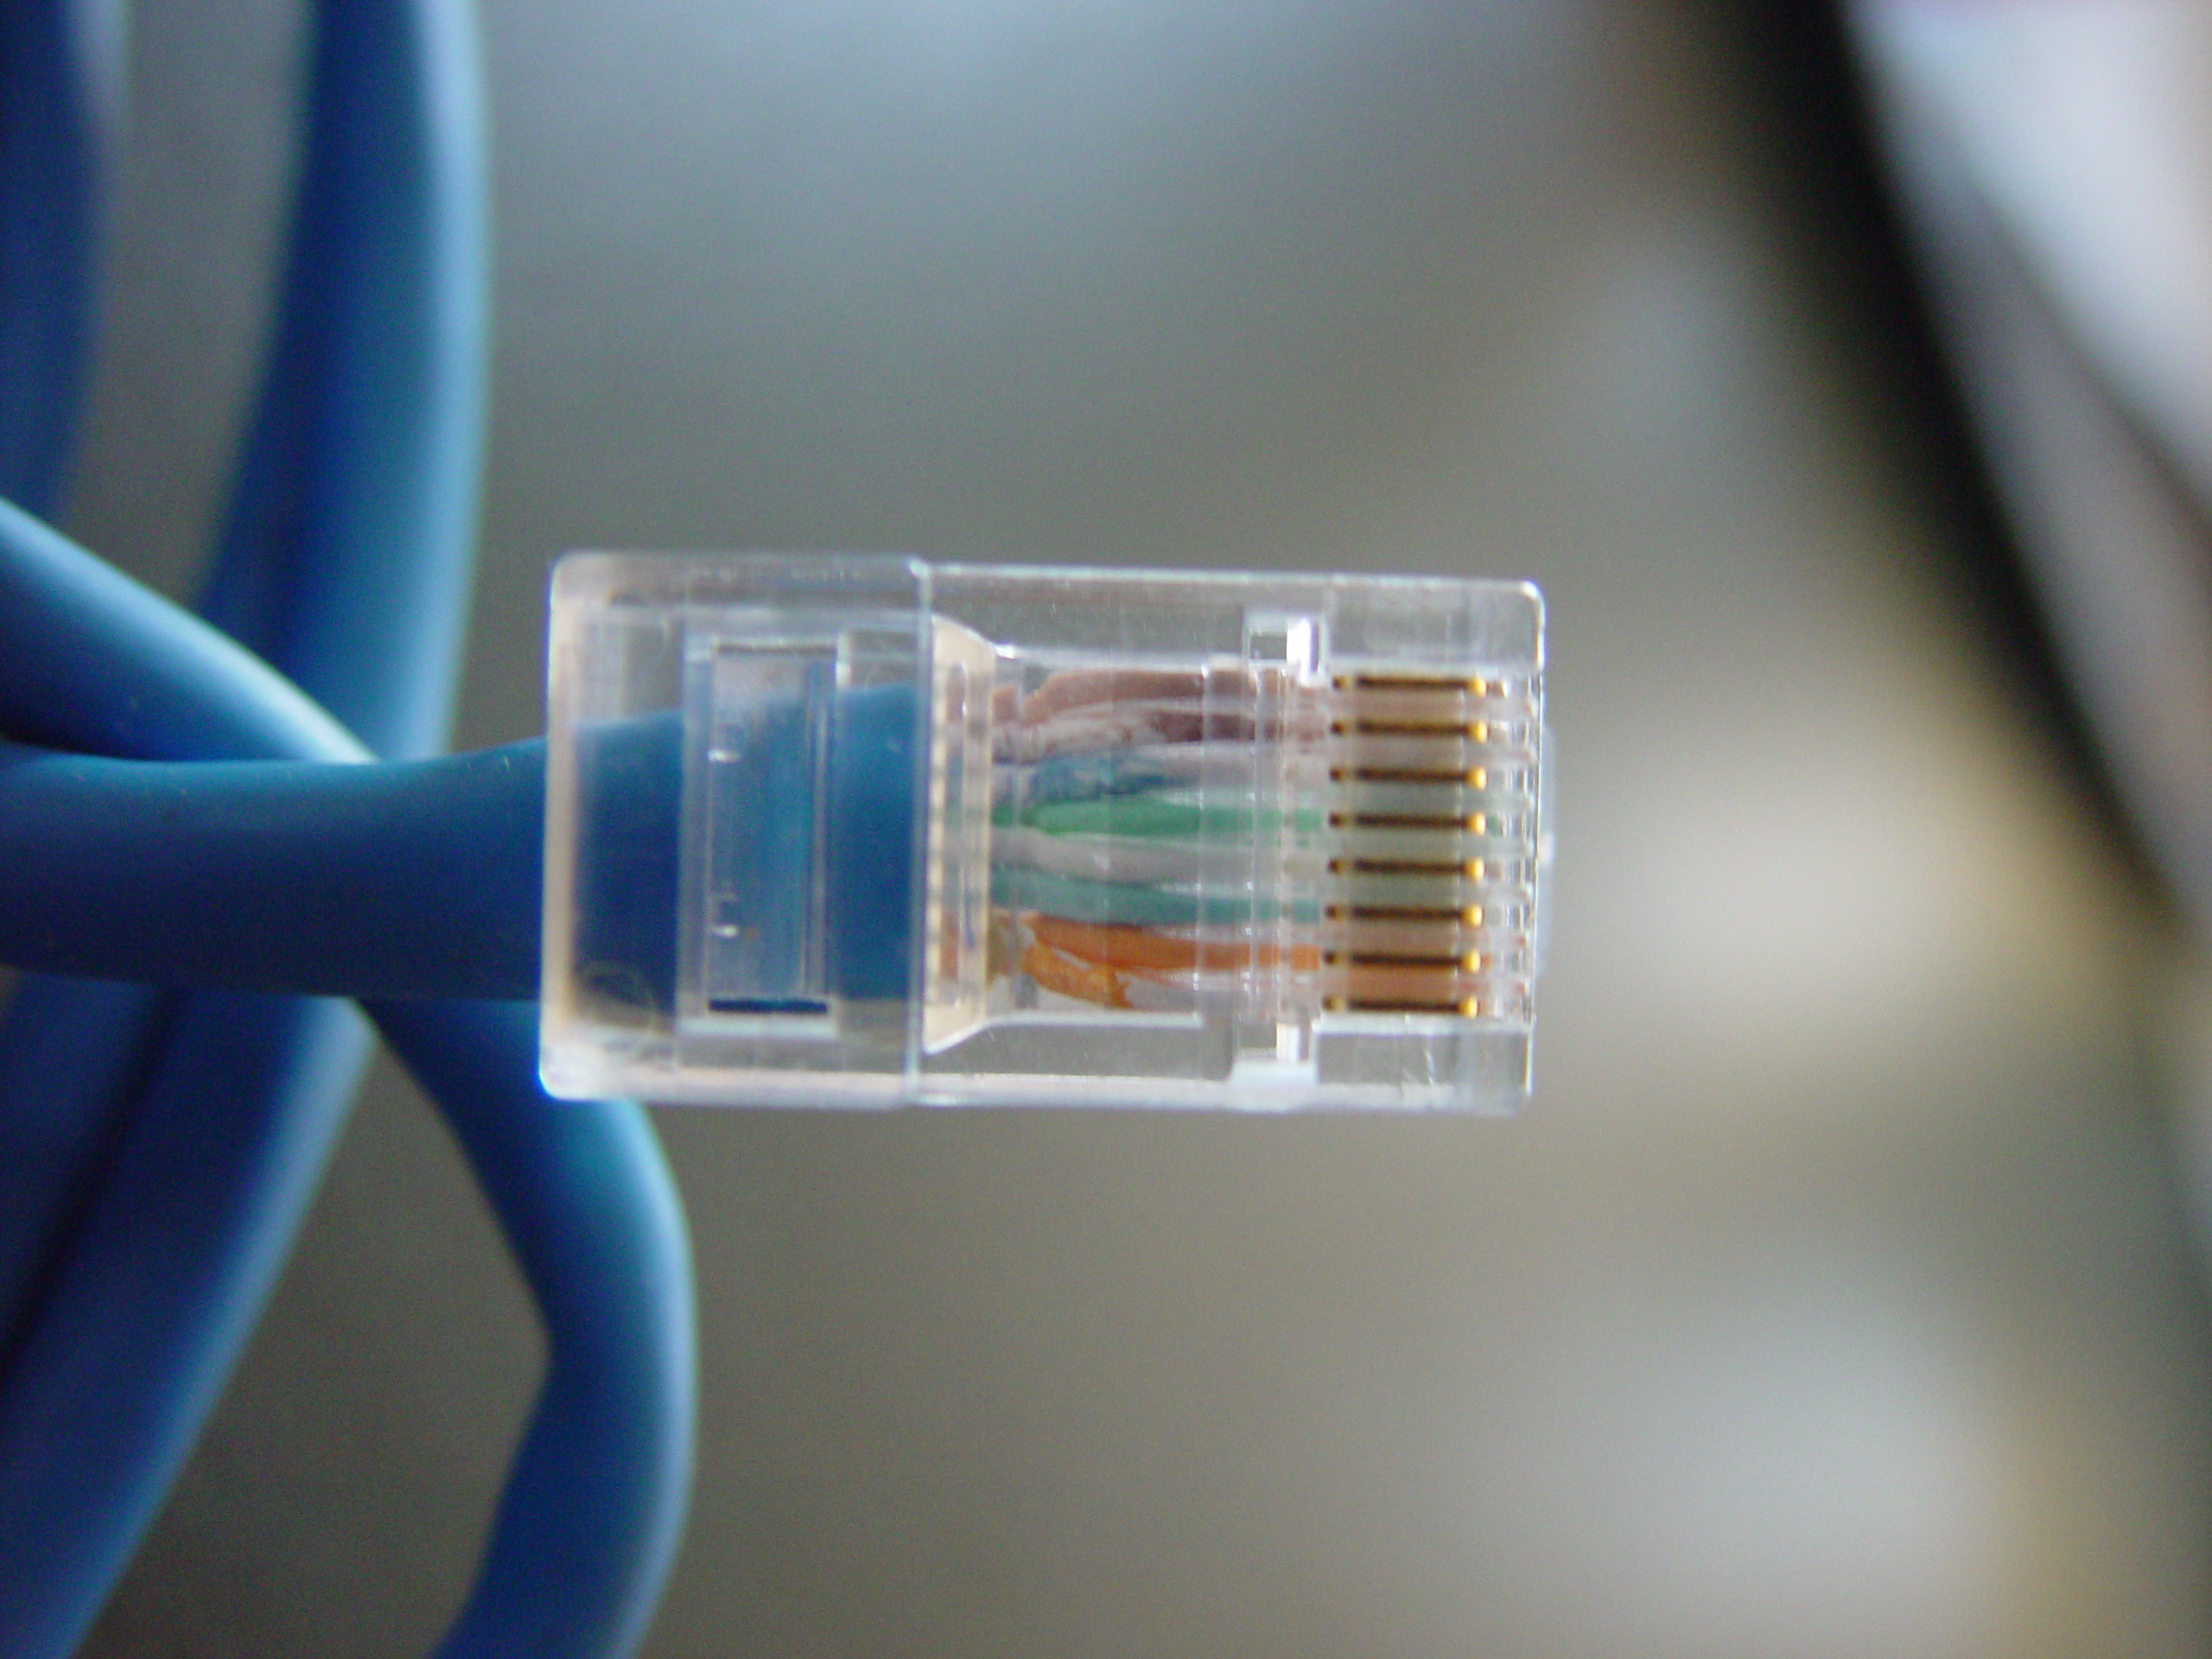 How to Fix Your IP Security Camera's Damaged RJ45 Ethernet Connection